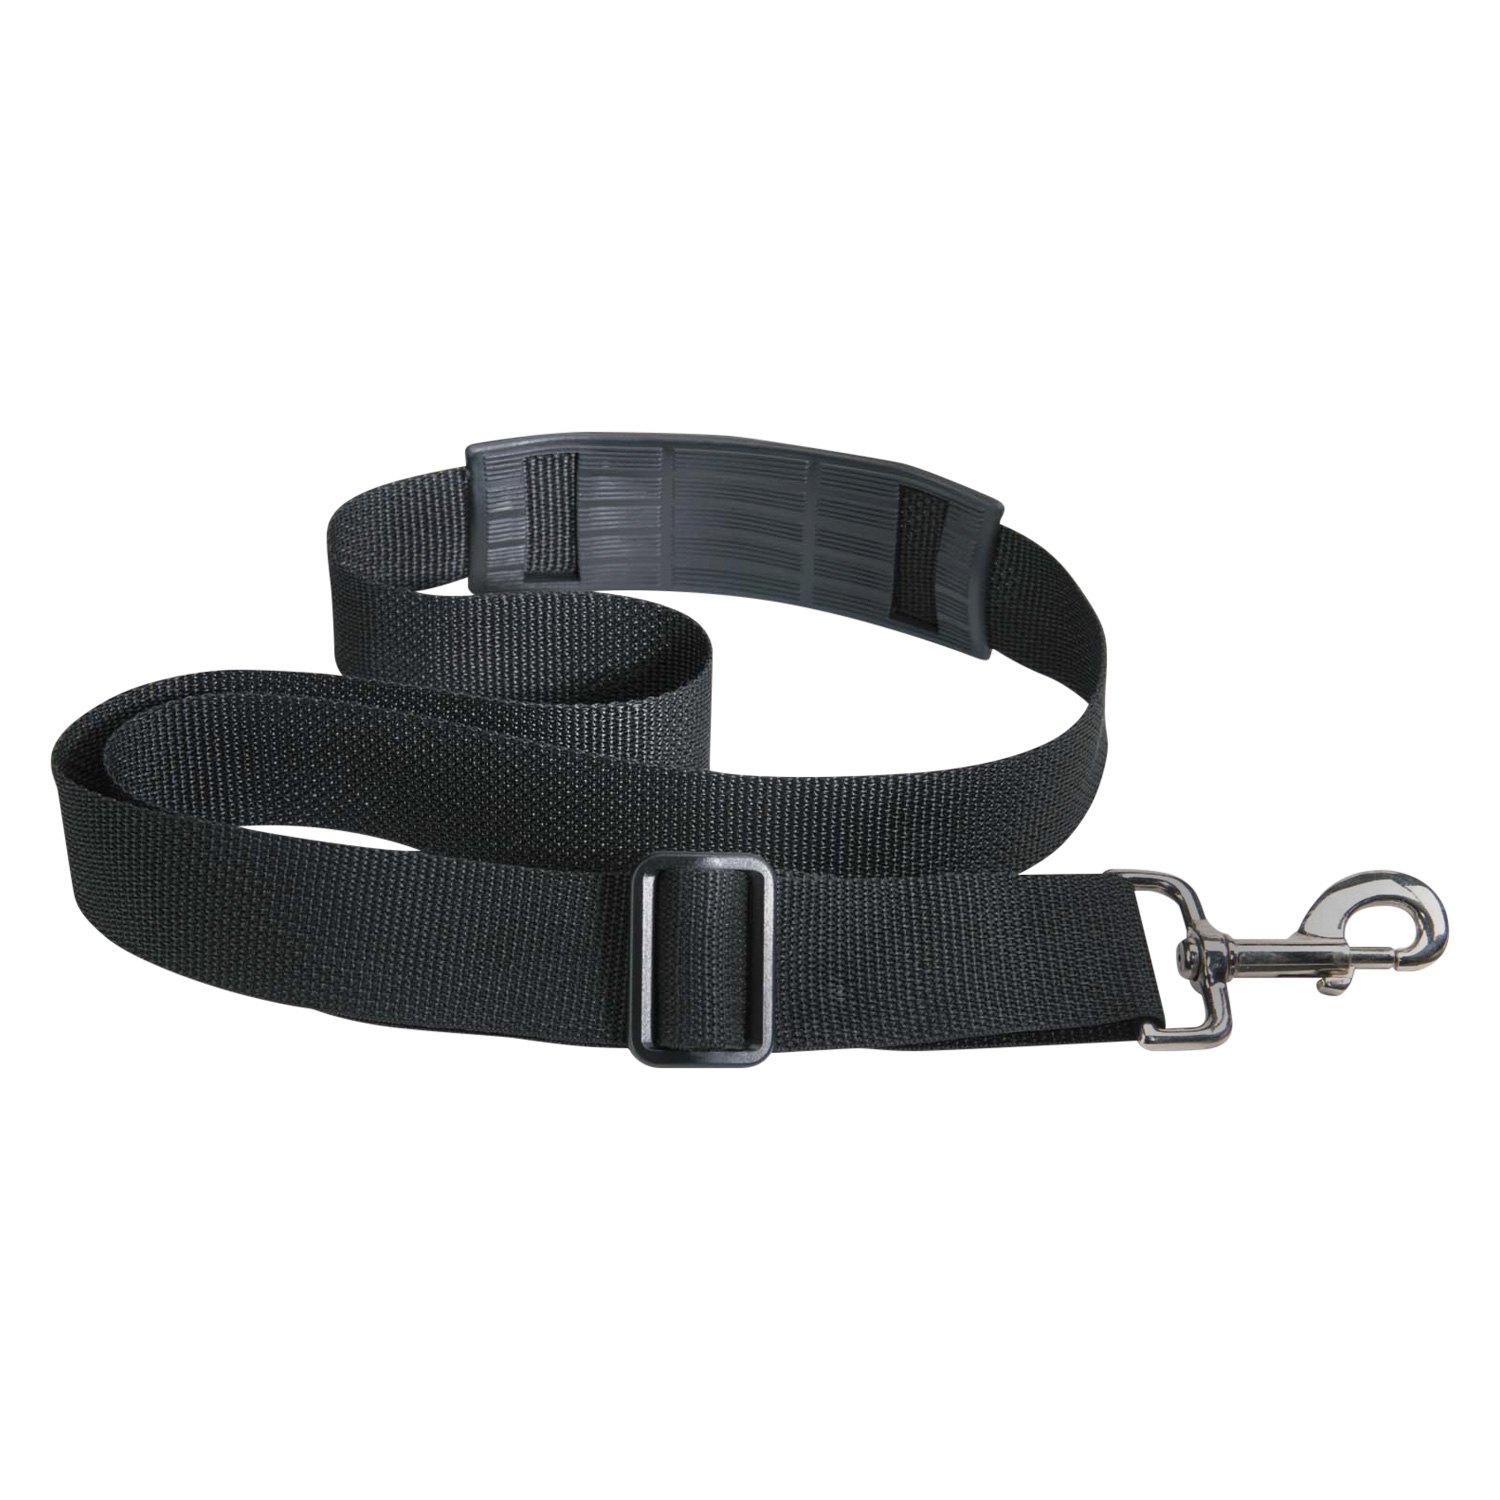 Lincoln® 1414 - Shoulder Strap for Powered Grease Guns - TOOLSiD.com